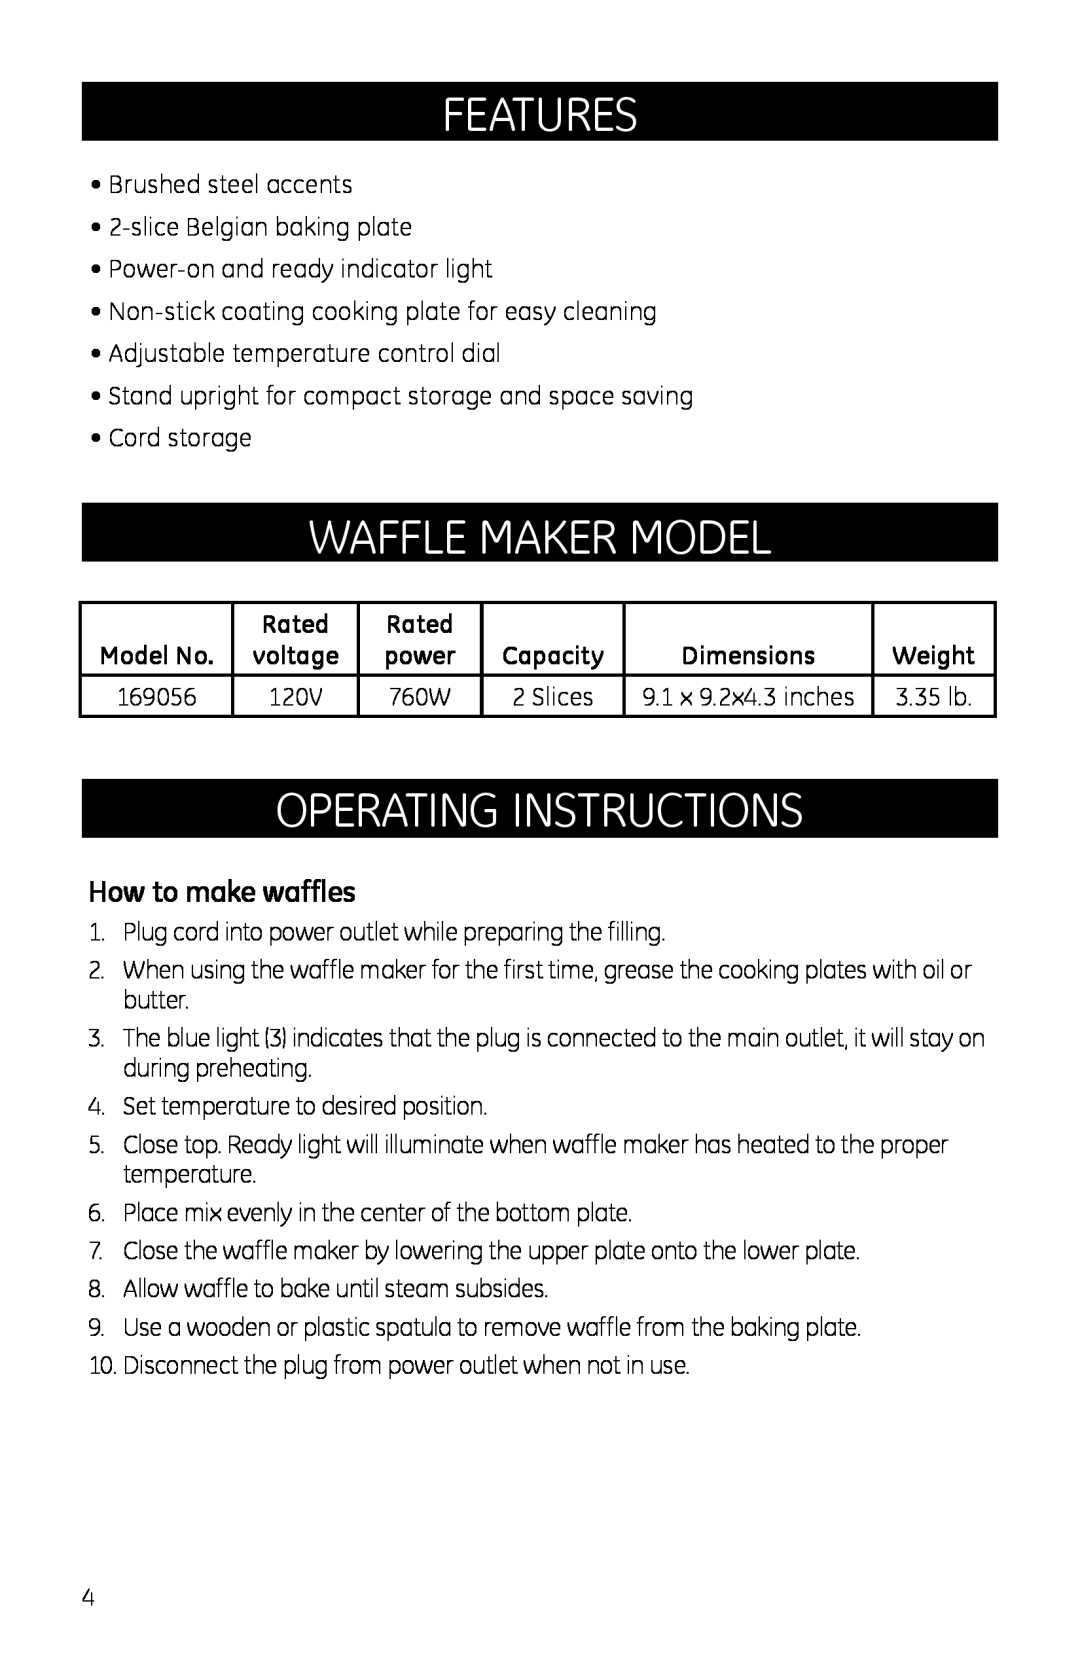 GE 681131690560, 169076 manual Features, waffle maker model, Operating Instructions, How to make waffles 